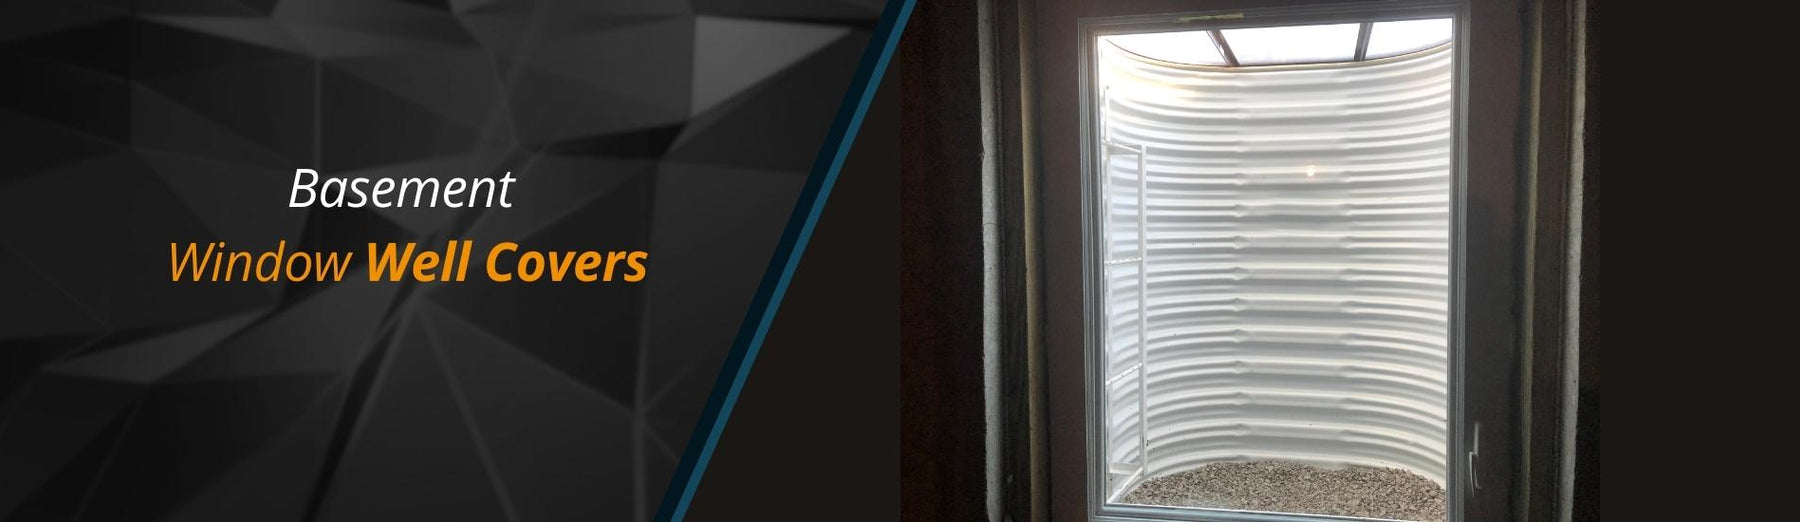 Basement Window Well Covers: Essential Guide for Protection and Safety